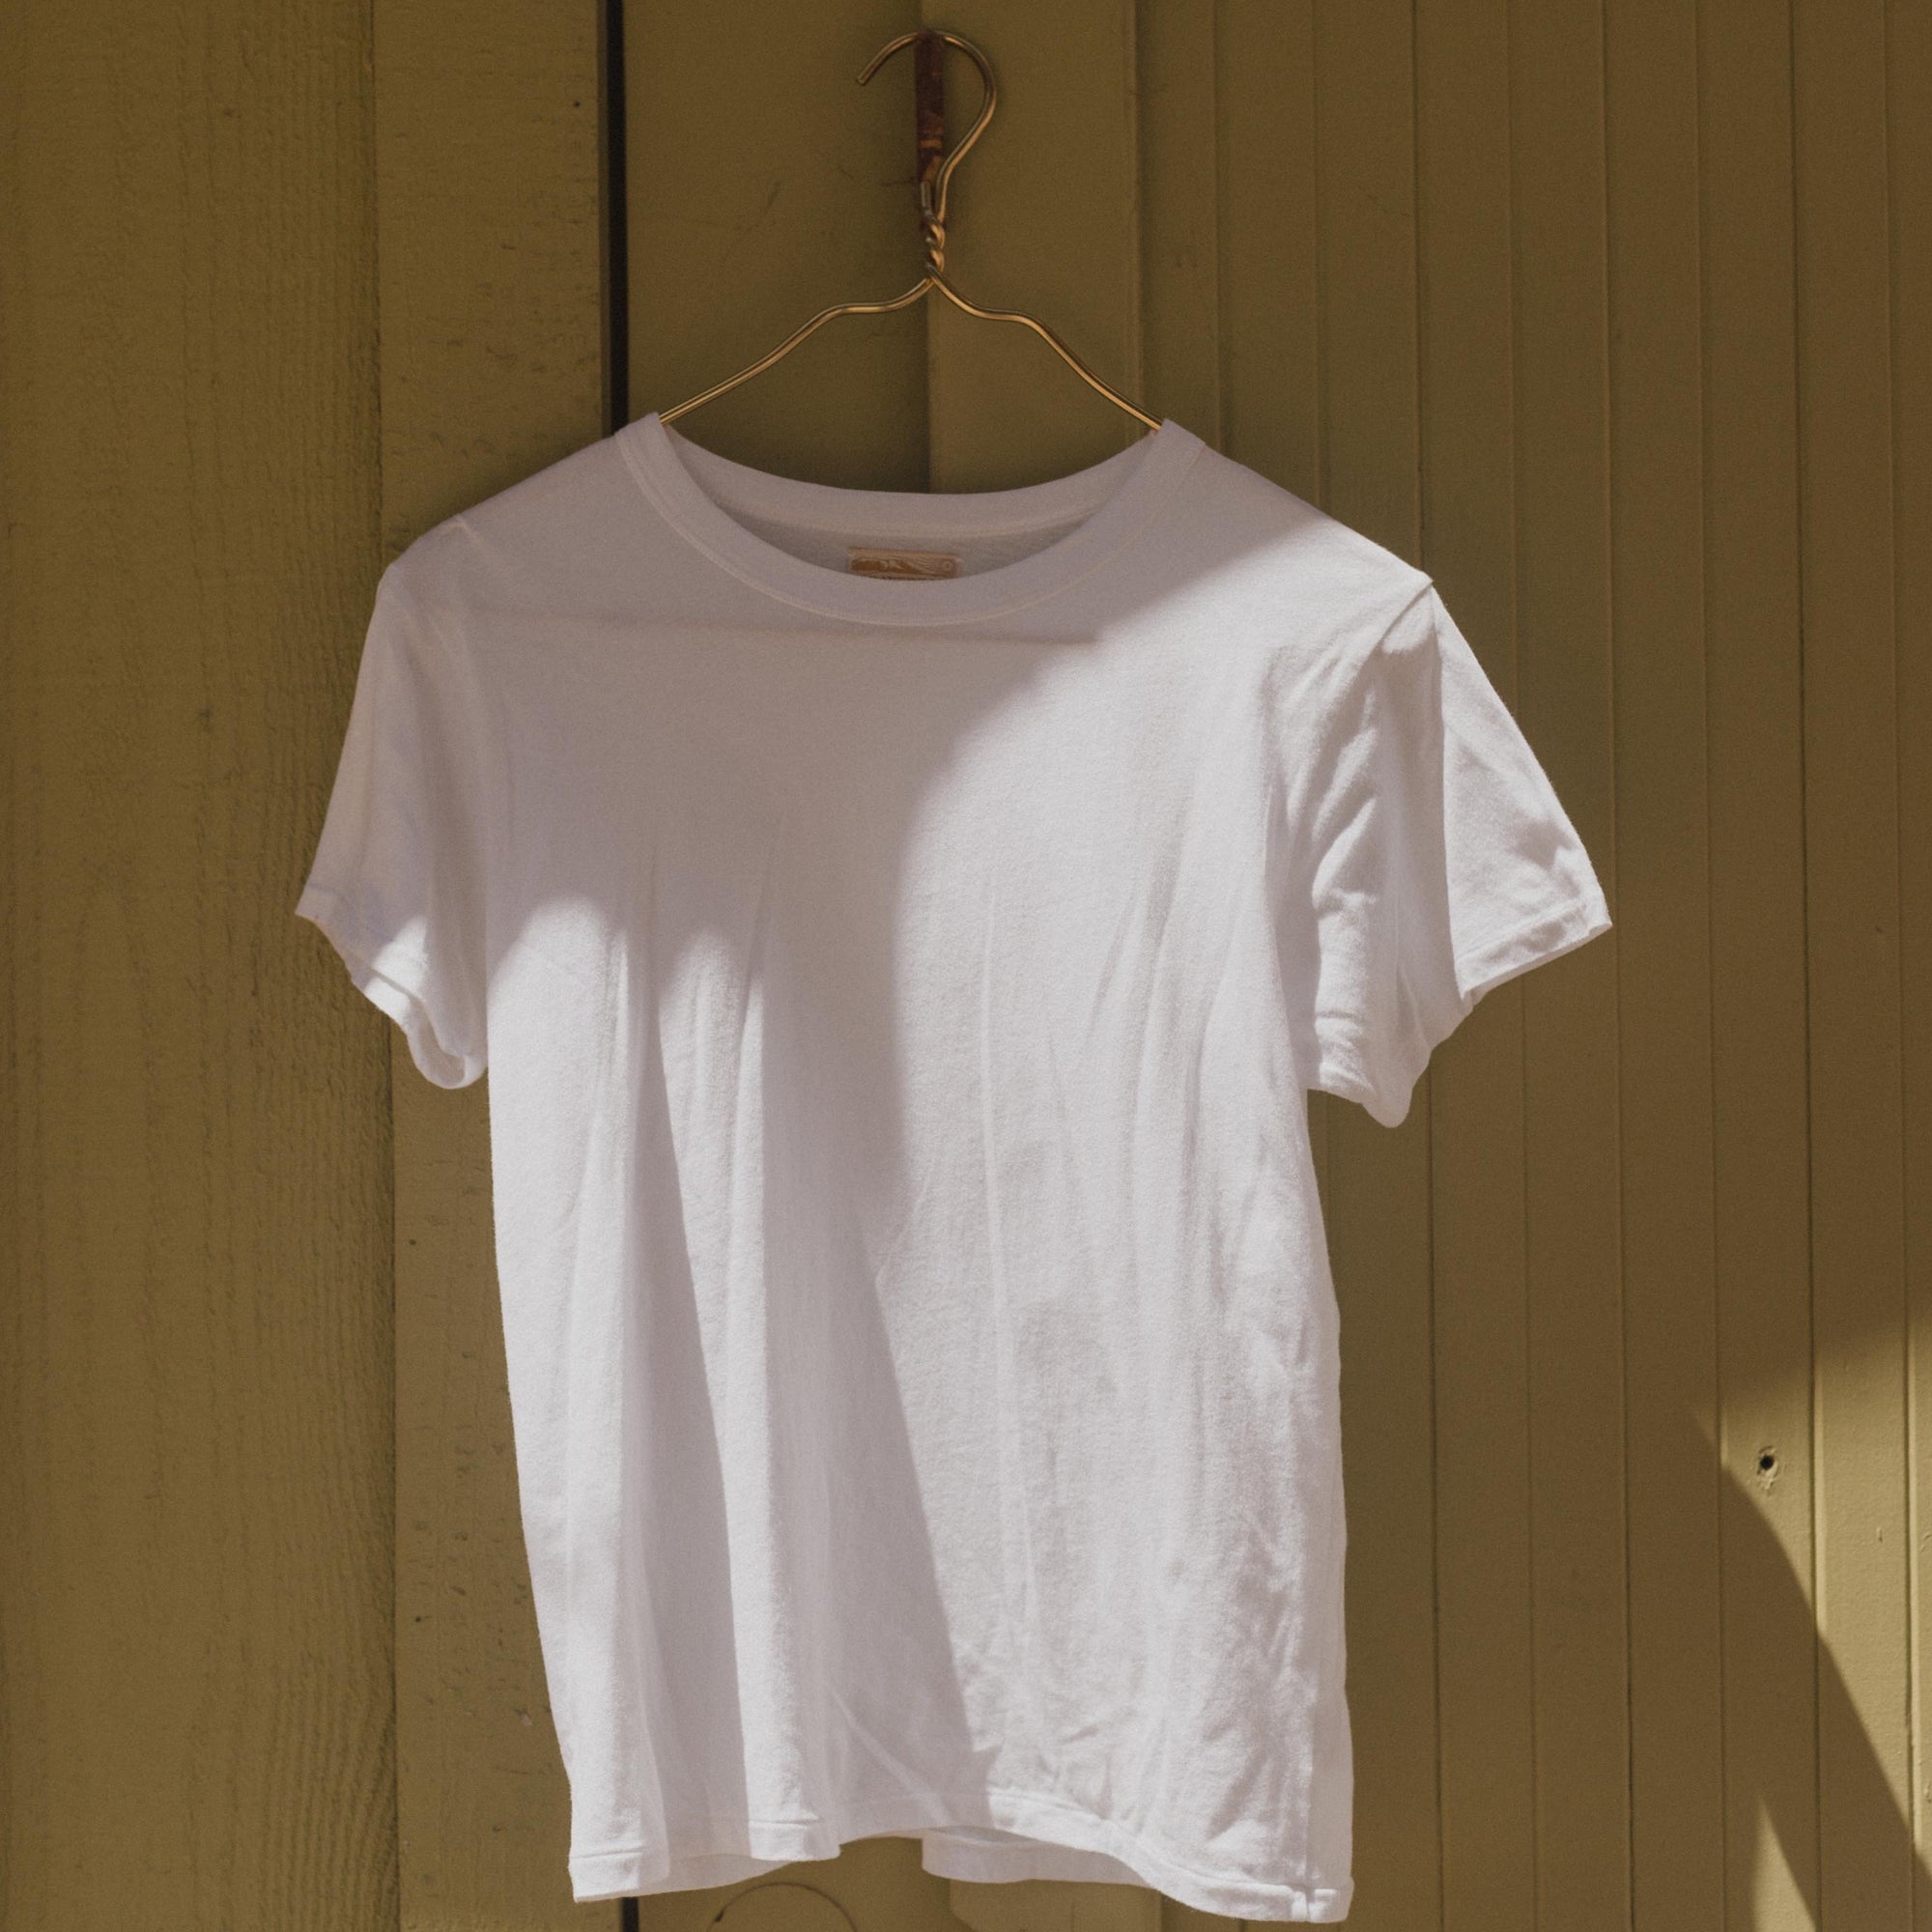 Womens Vintage Fit Cotton Tee in White